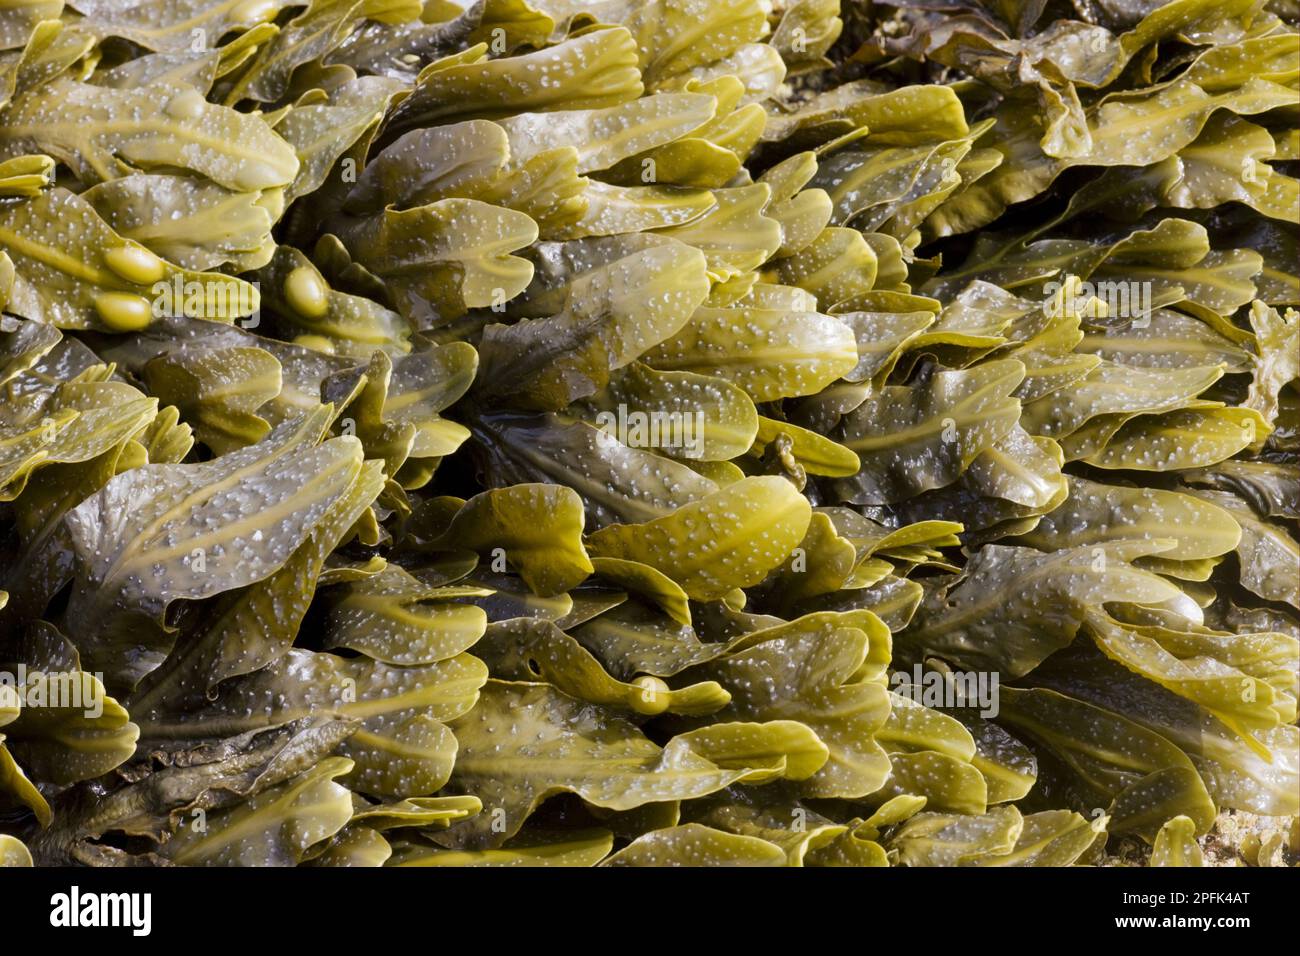 Bladder wrack (Fucus vesiculosus) fronds, exposed on rocky shores at low tide, Brough Head, mainland, Orkney, Scotland, United Kingdom Stock Photo